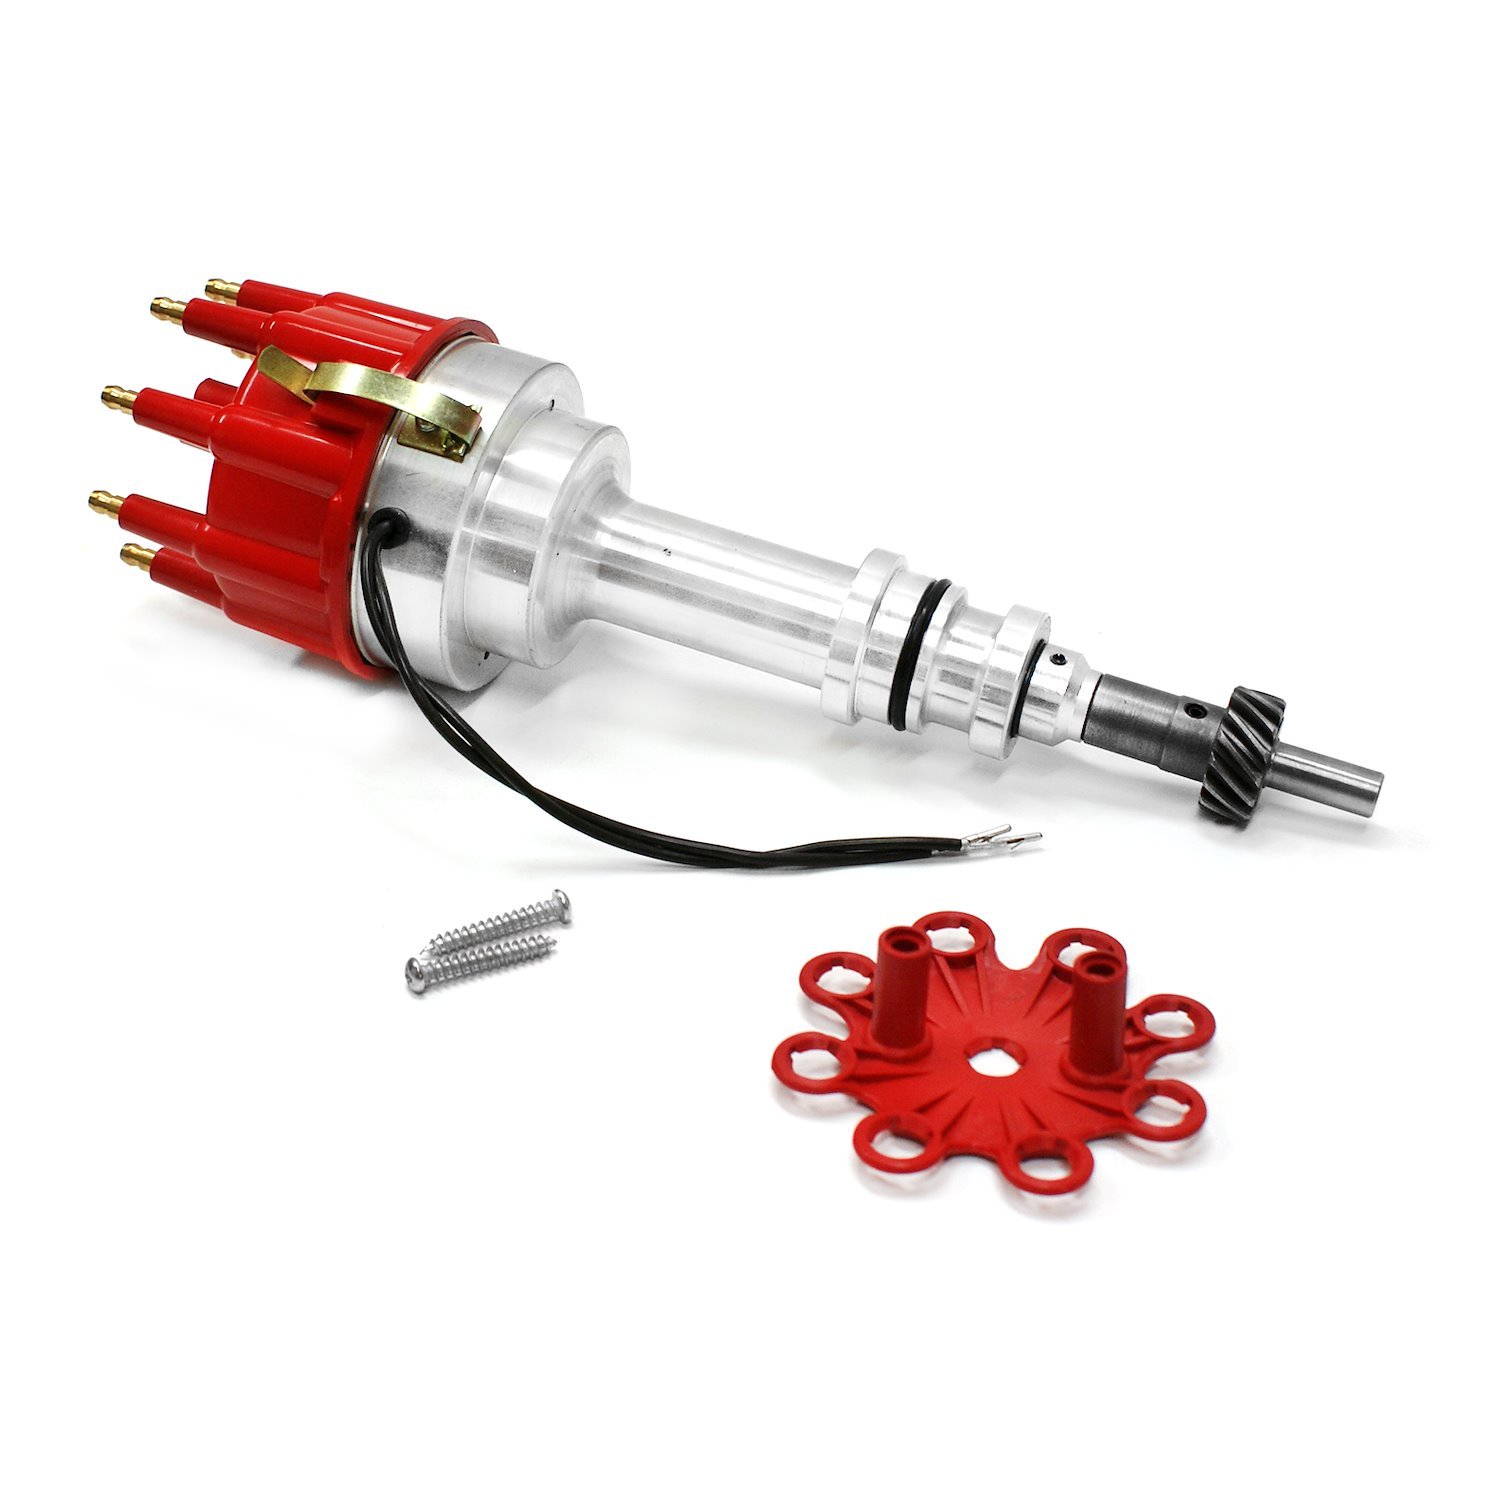 8000-Series Pro-Billet Distributor Ford 351W [Red Cap]